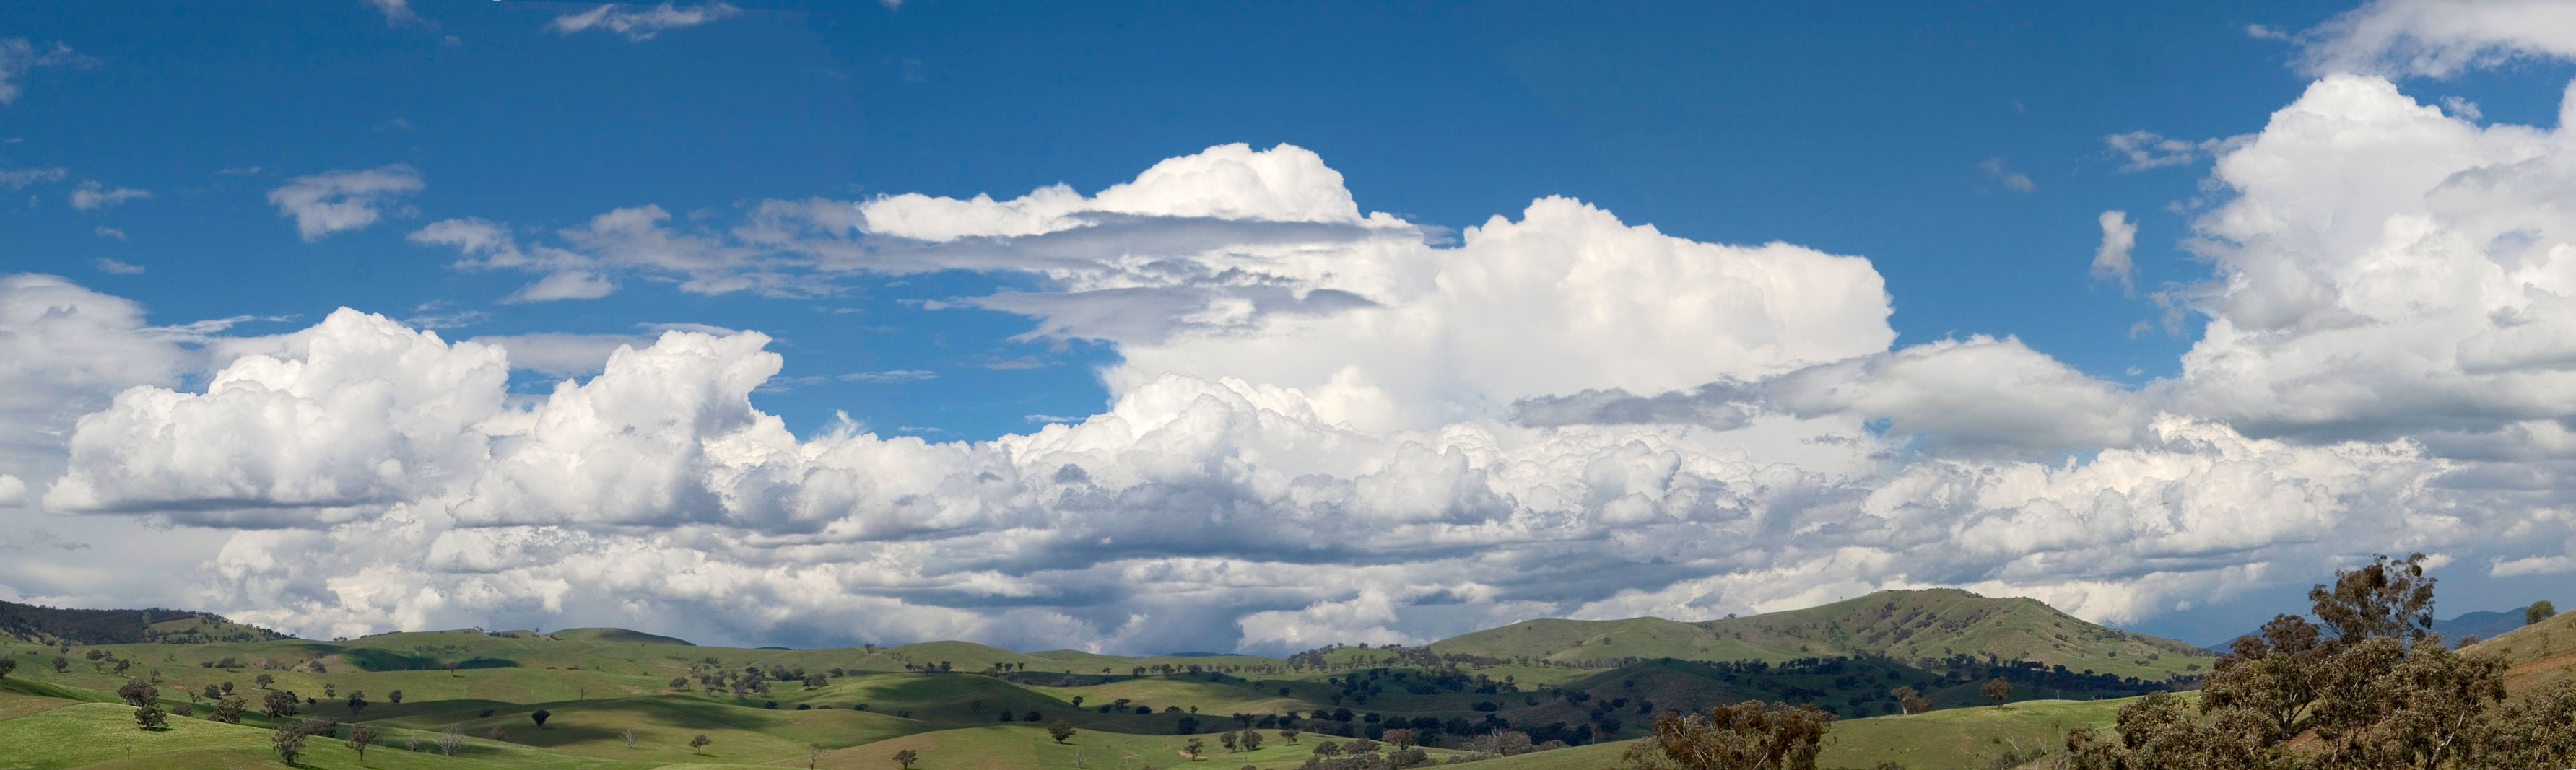 Get to Know a Cloud | California Academy of Sciences